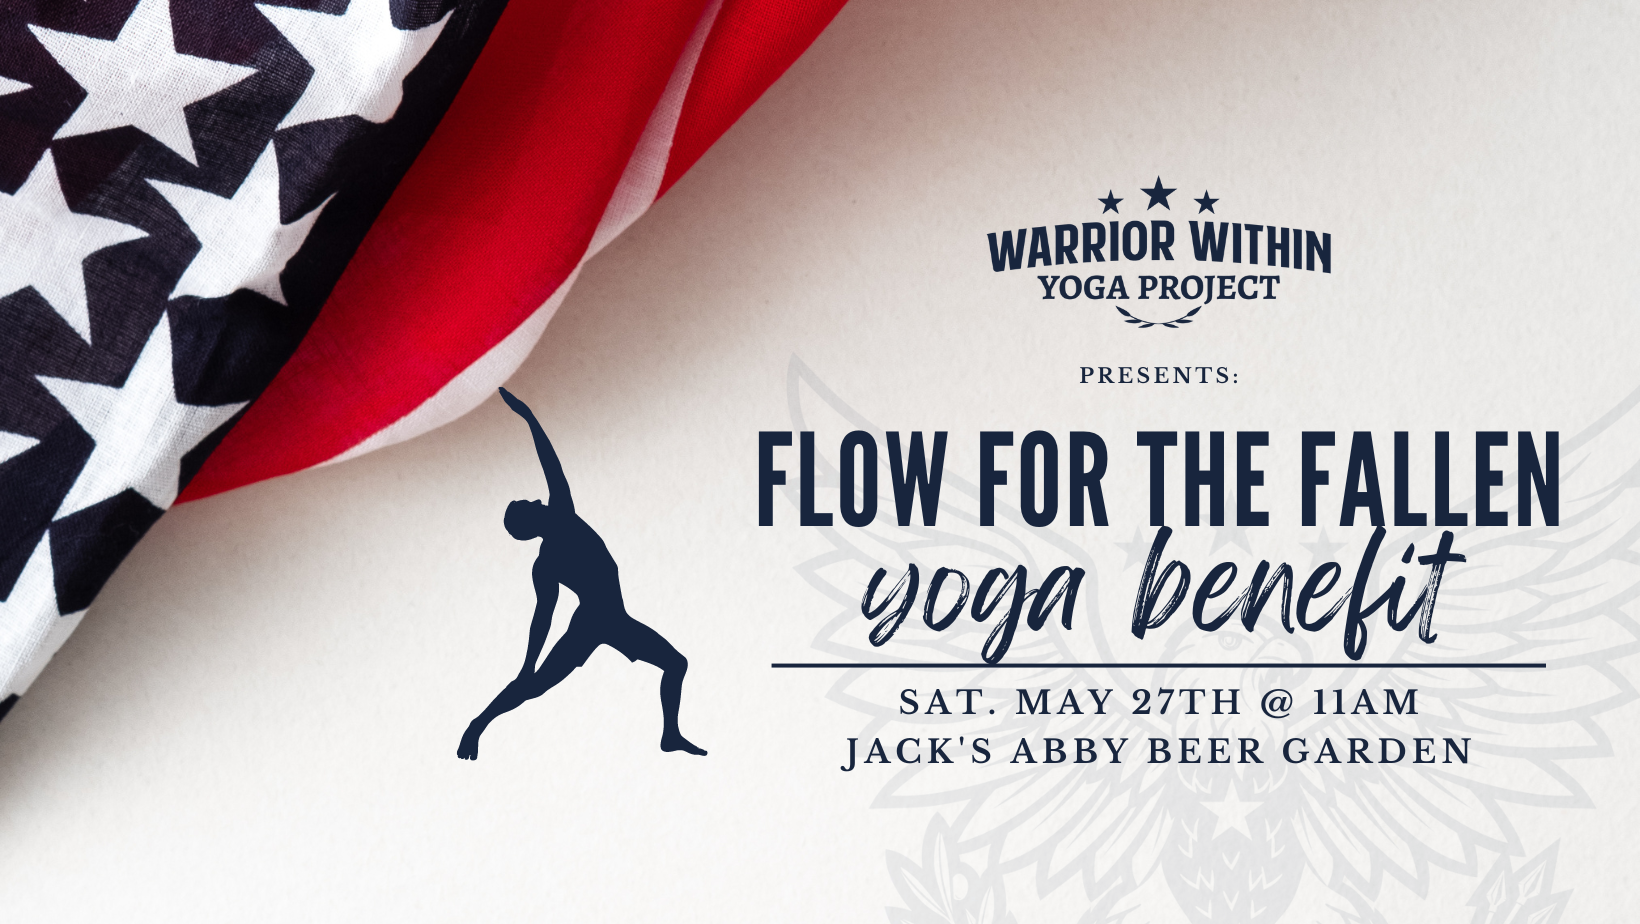 Event graphic. Copy reads "Warrior Within Yoga Project presents Flow For The Fallen Yoga Benefit. Sat. May 27th 11am Jacks Abby Beer Garden". Contains an image of silhouette in yoga pose.